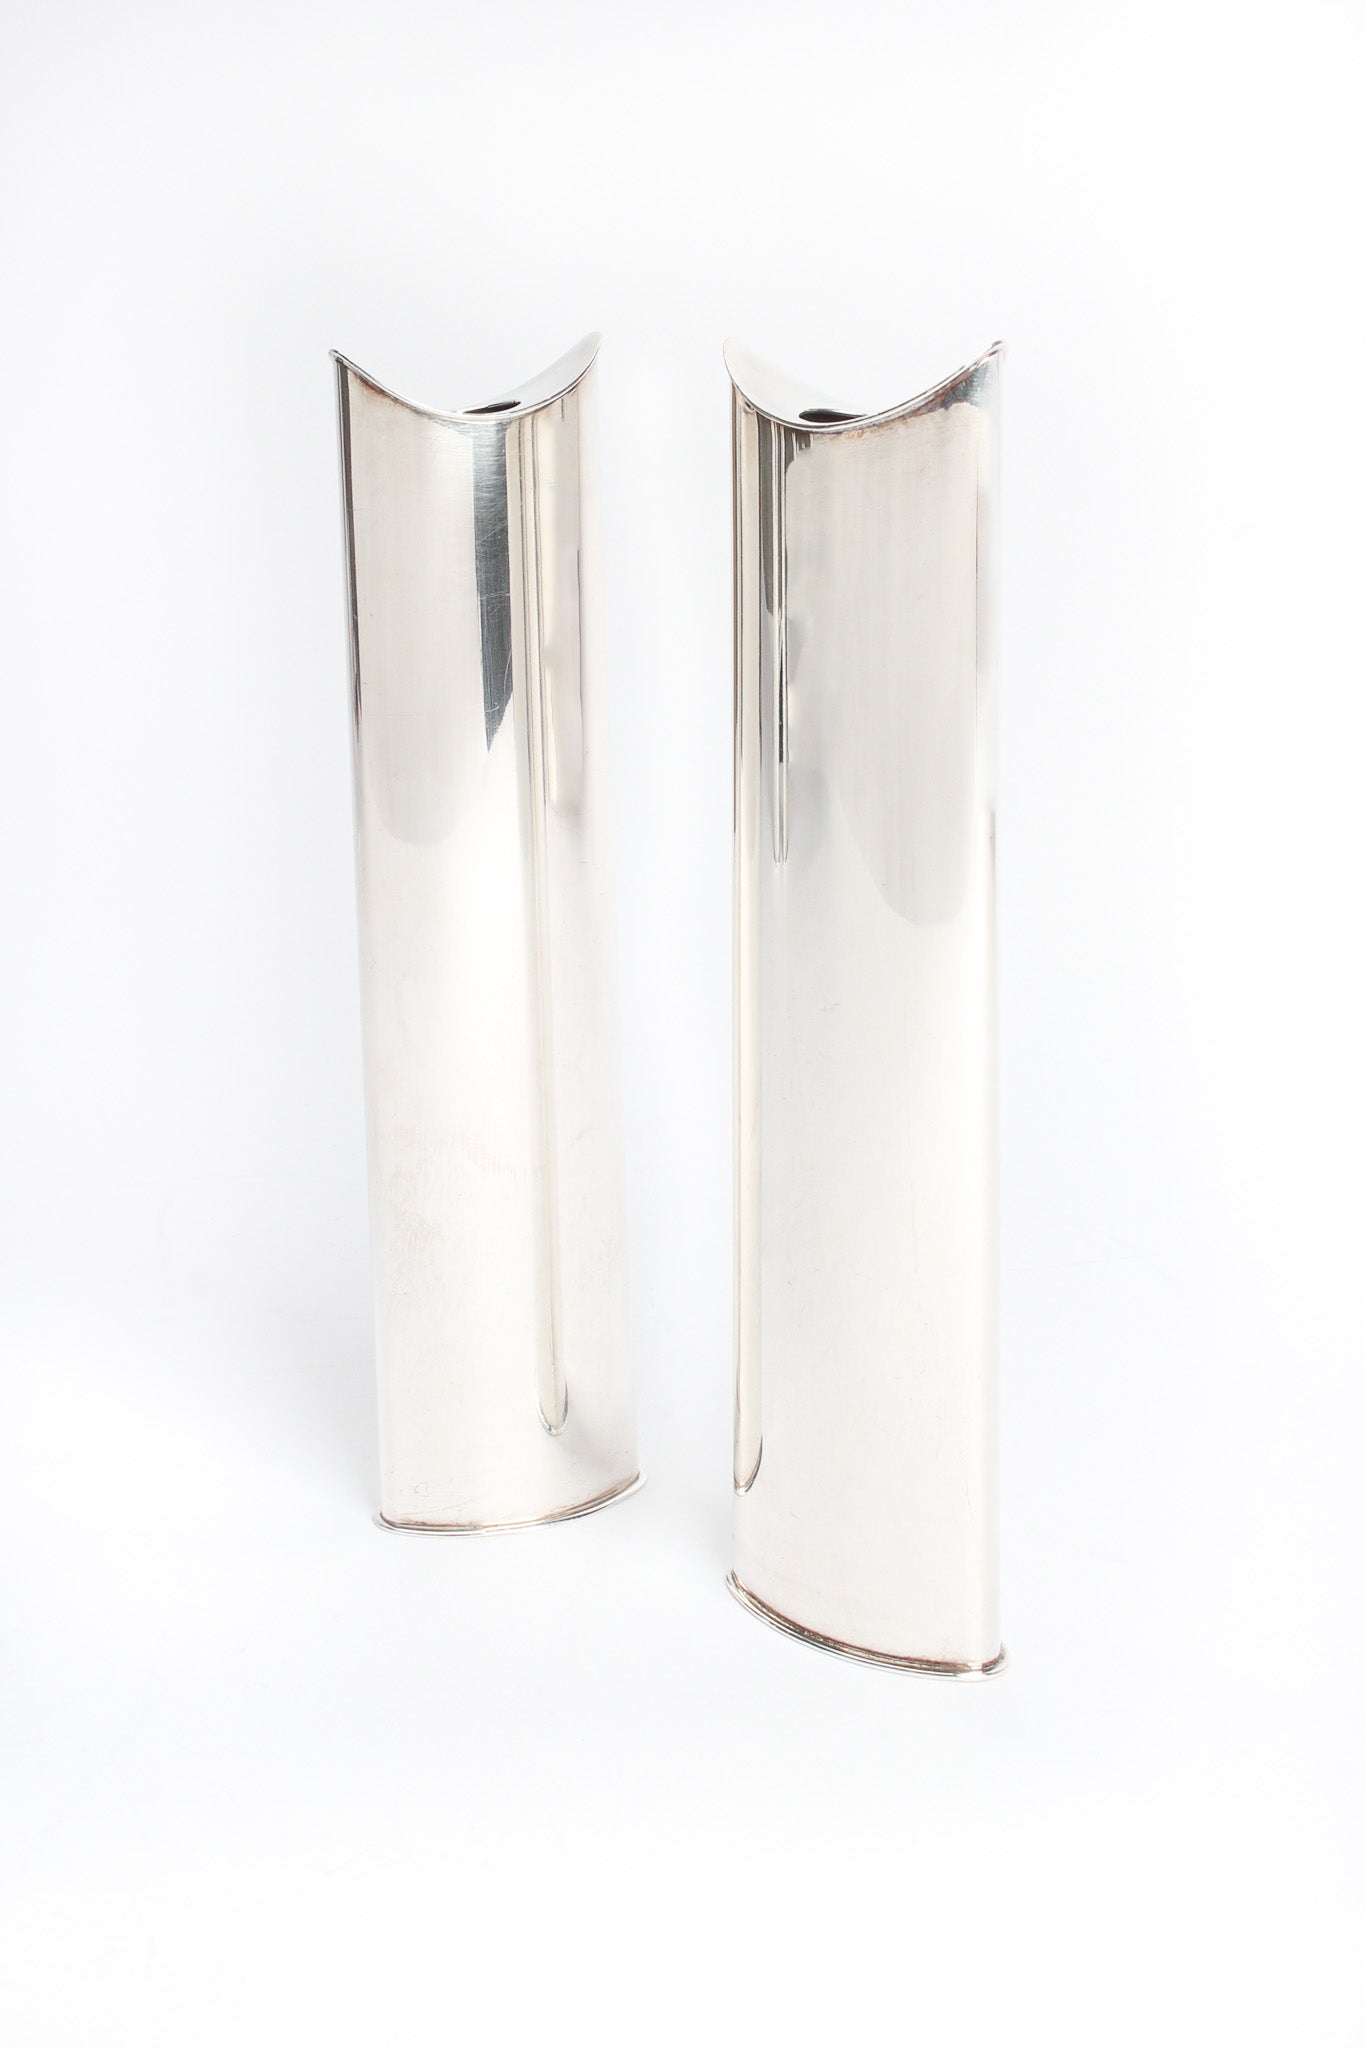 Sculptural Silver Candle Holders